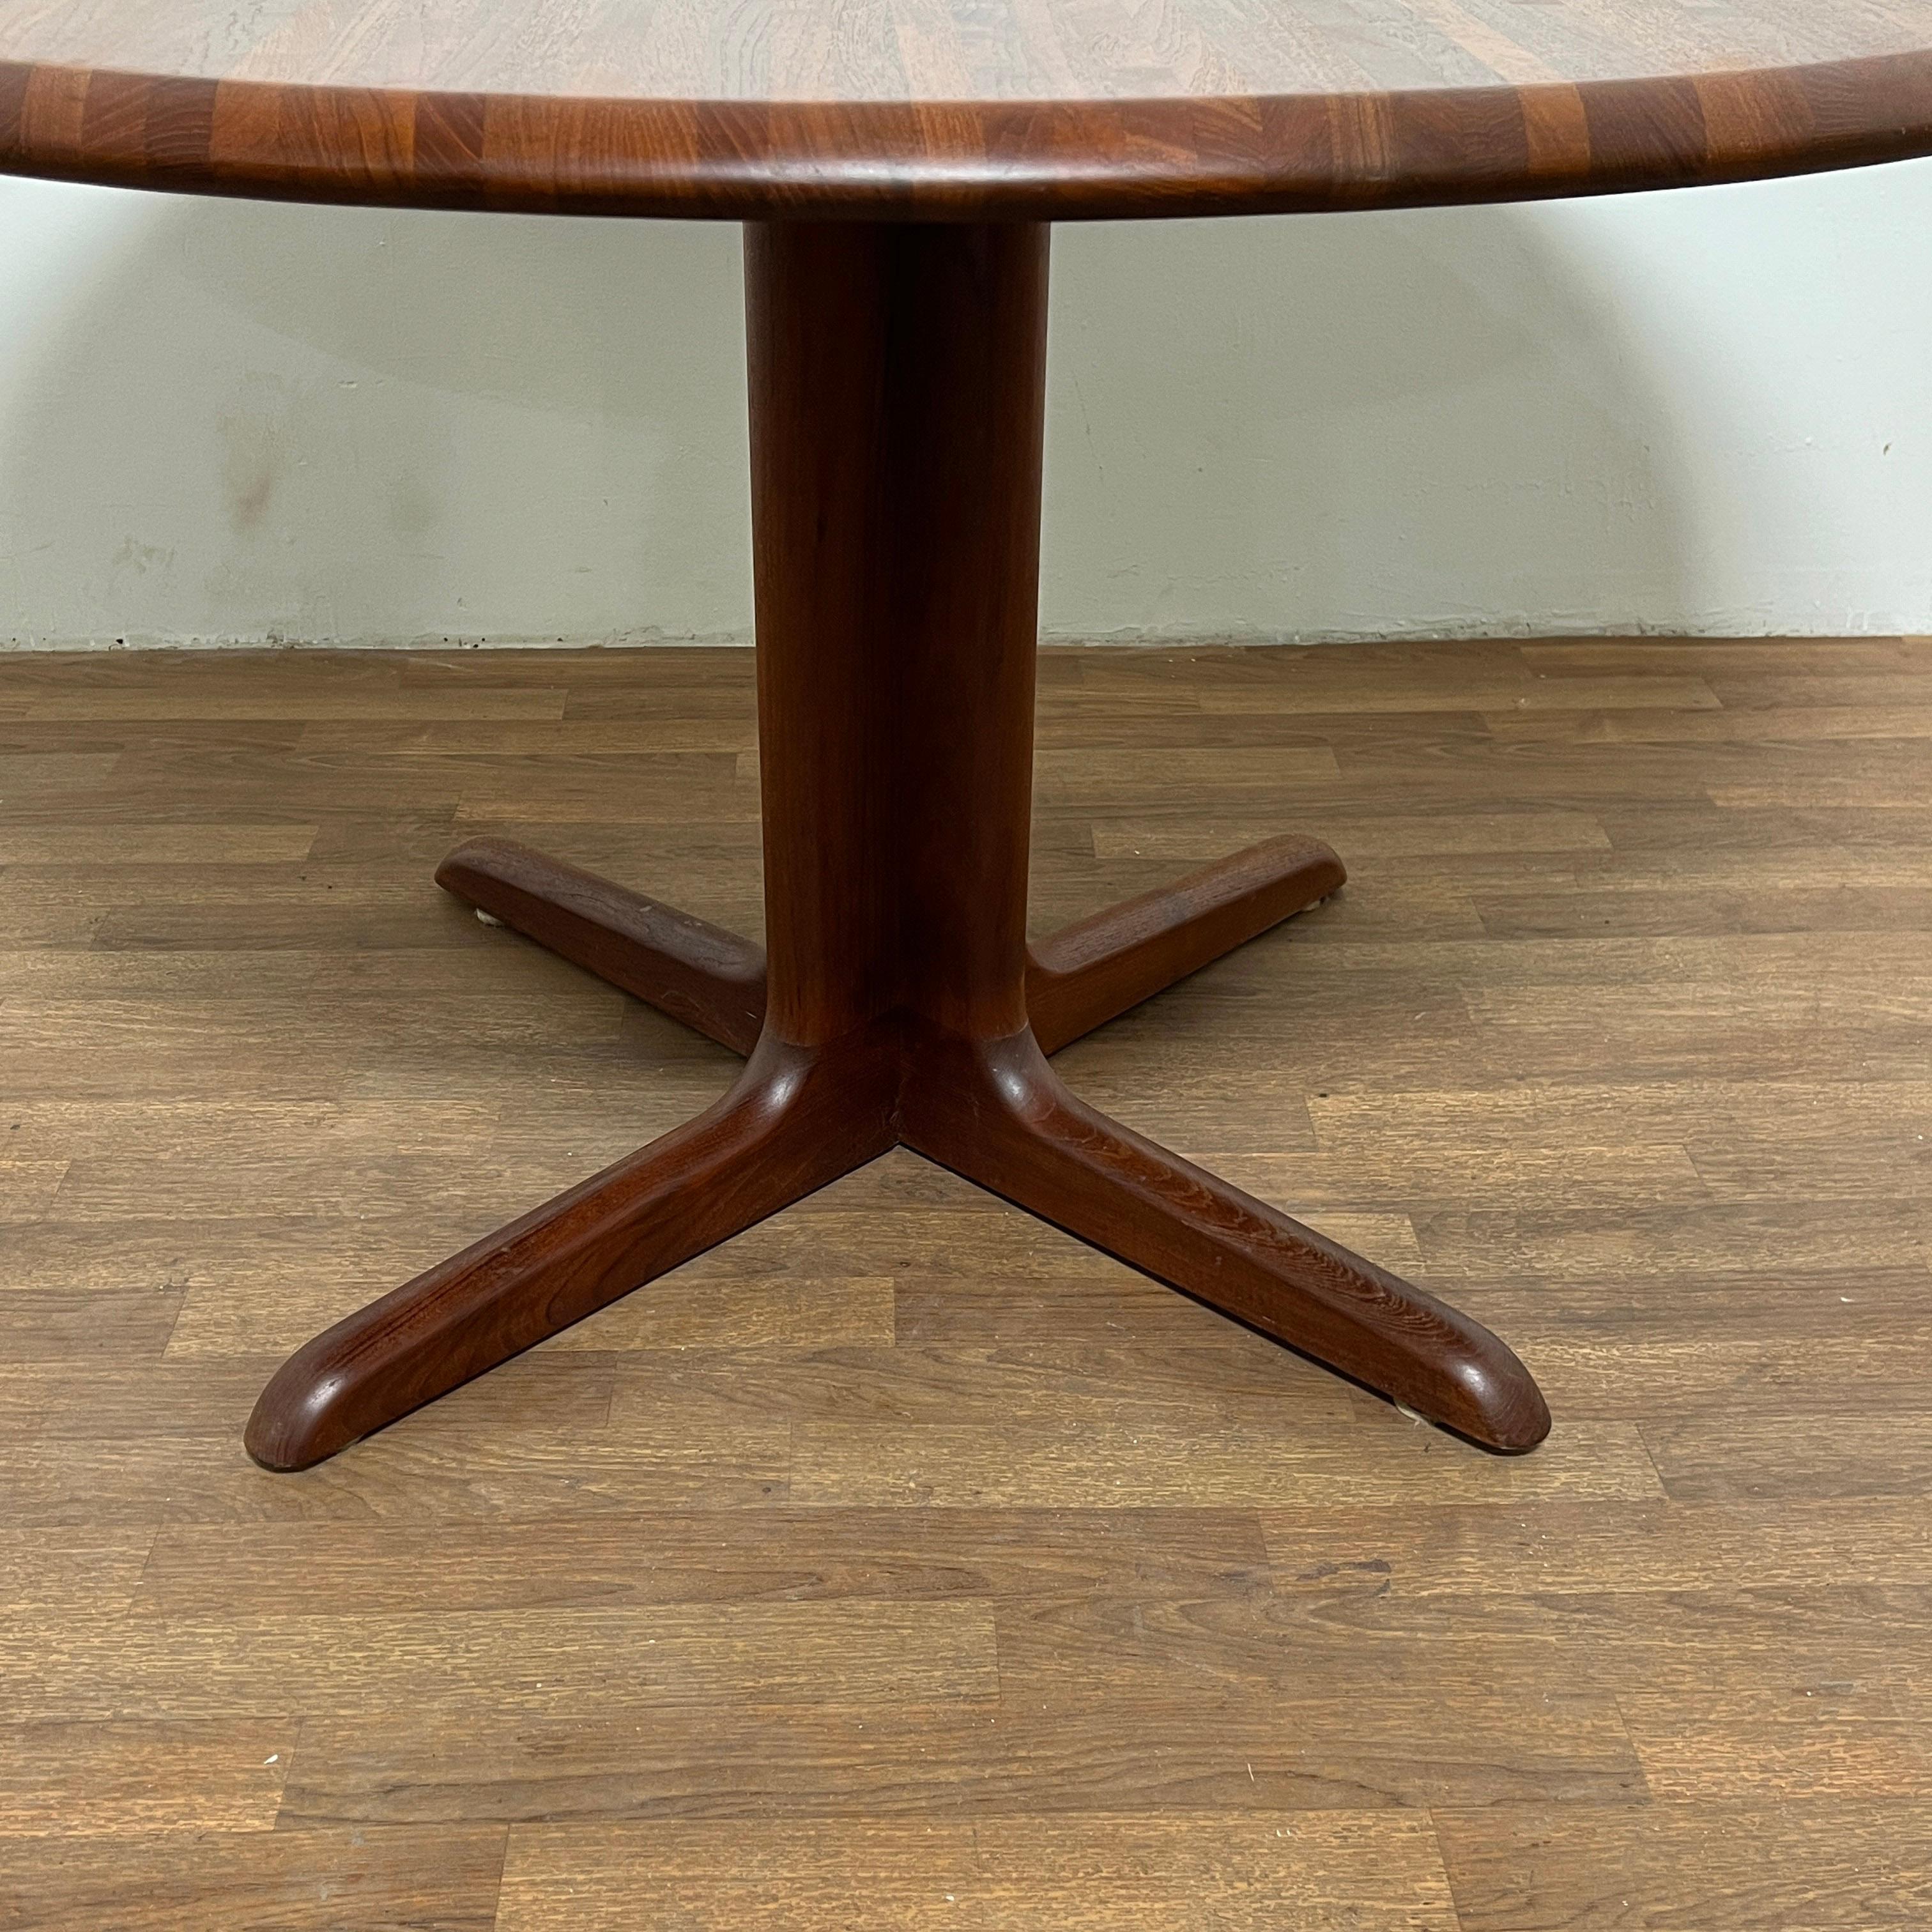 Late 20th Century Danish Modern Staved Teak Dining Table Circa 1970s For Sale